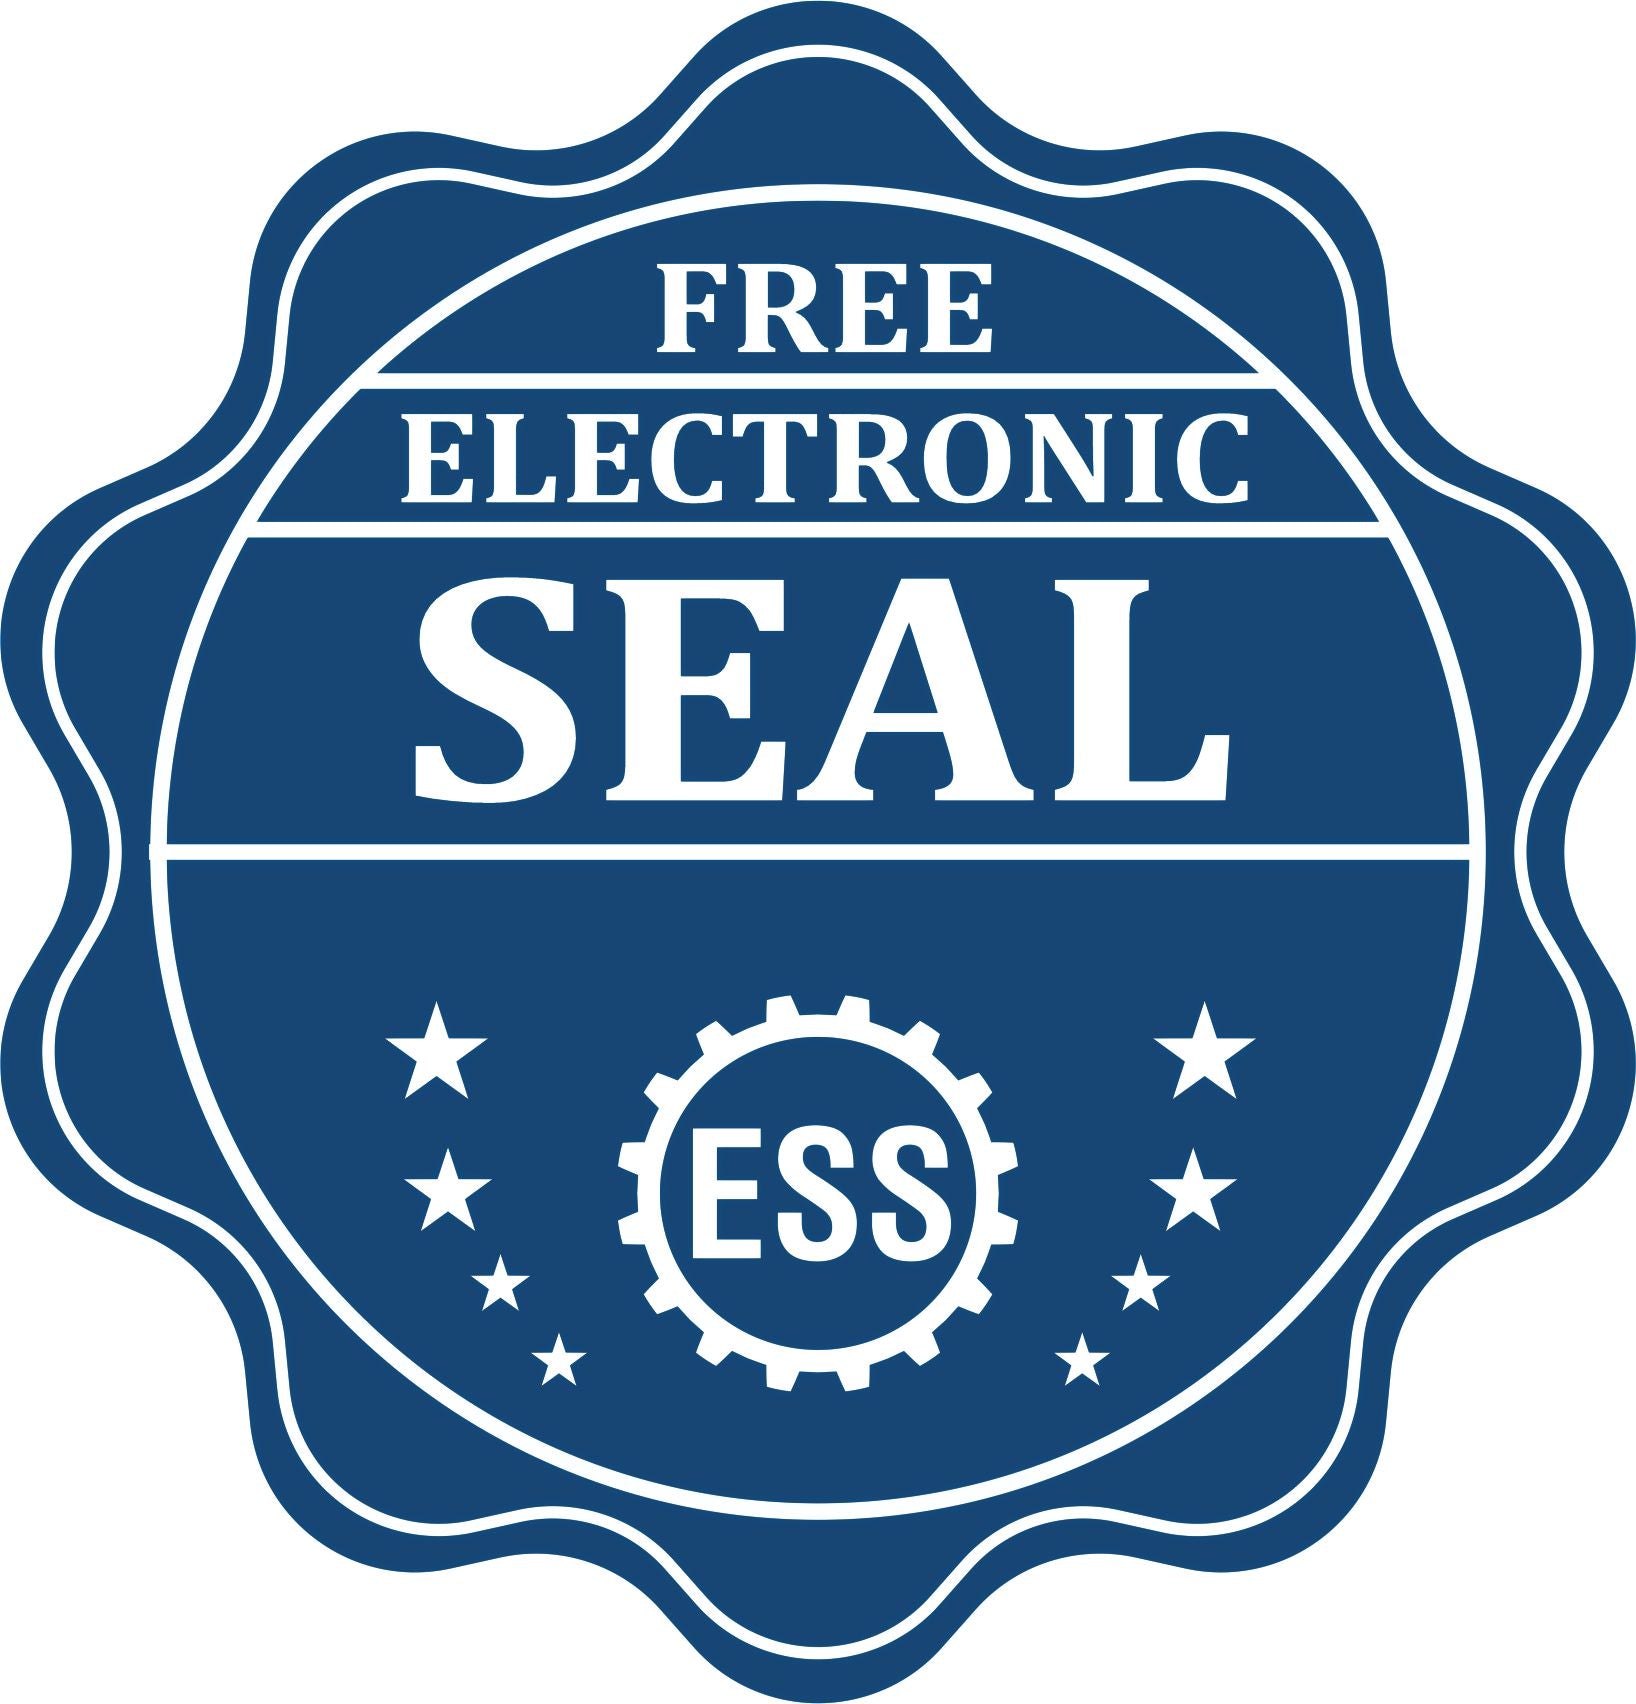 A badge showing a free electronic seal for the Slim Pre-Inked Nevada Land Surveyor Seal Stamp with stars and the ESS gear on the emblem.